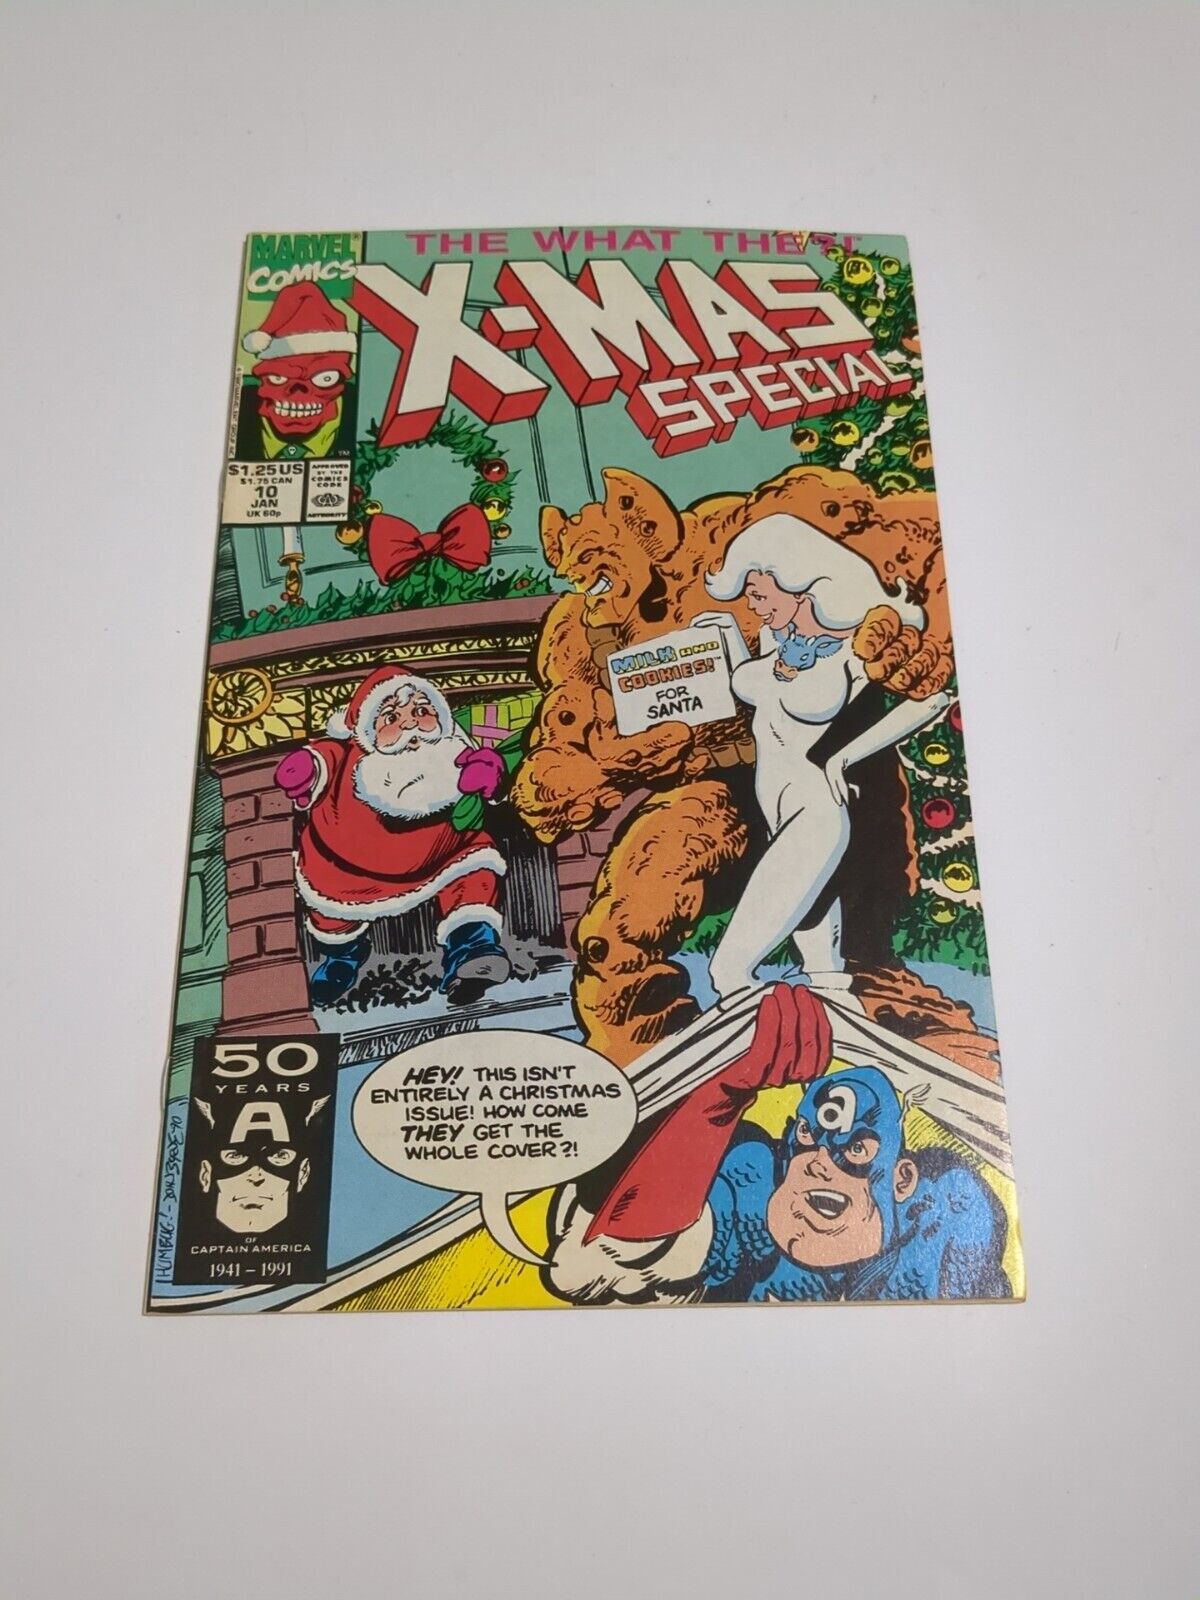 WHAT THE - -? #10 (X-MAS SPECIAL) MARVEL COMIC BOOK 